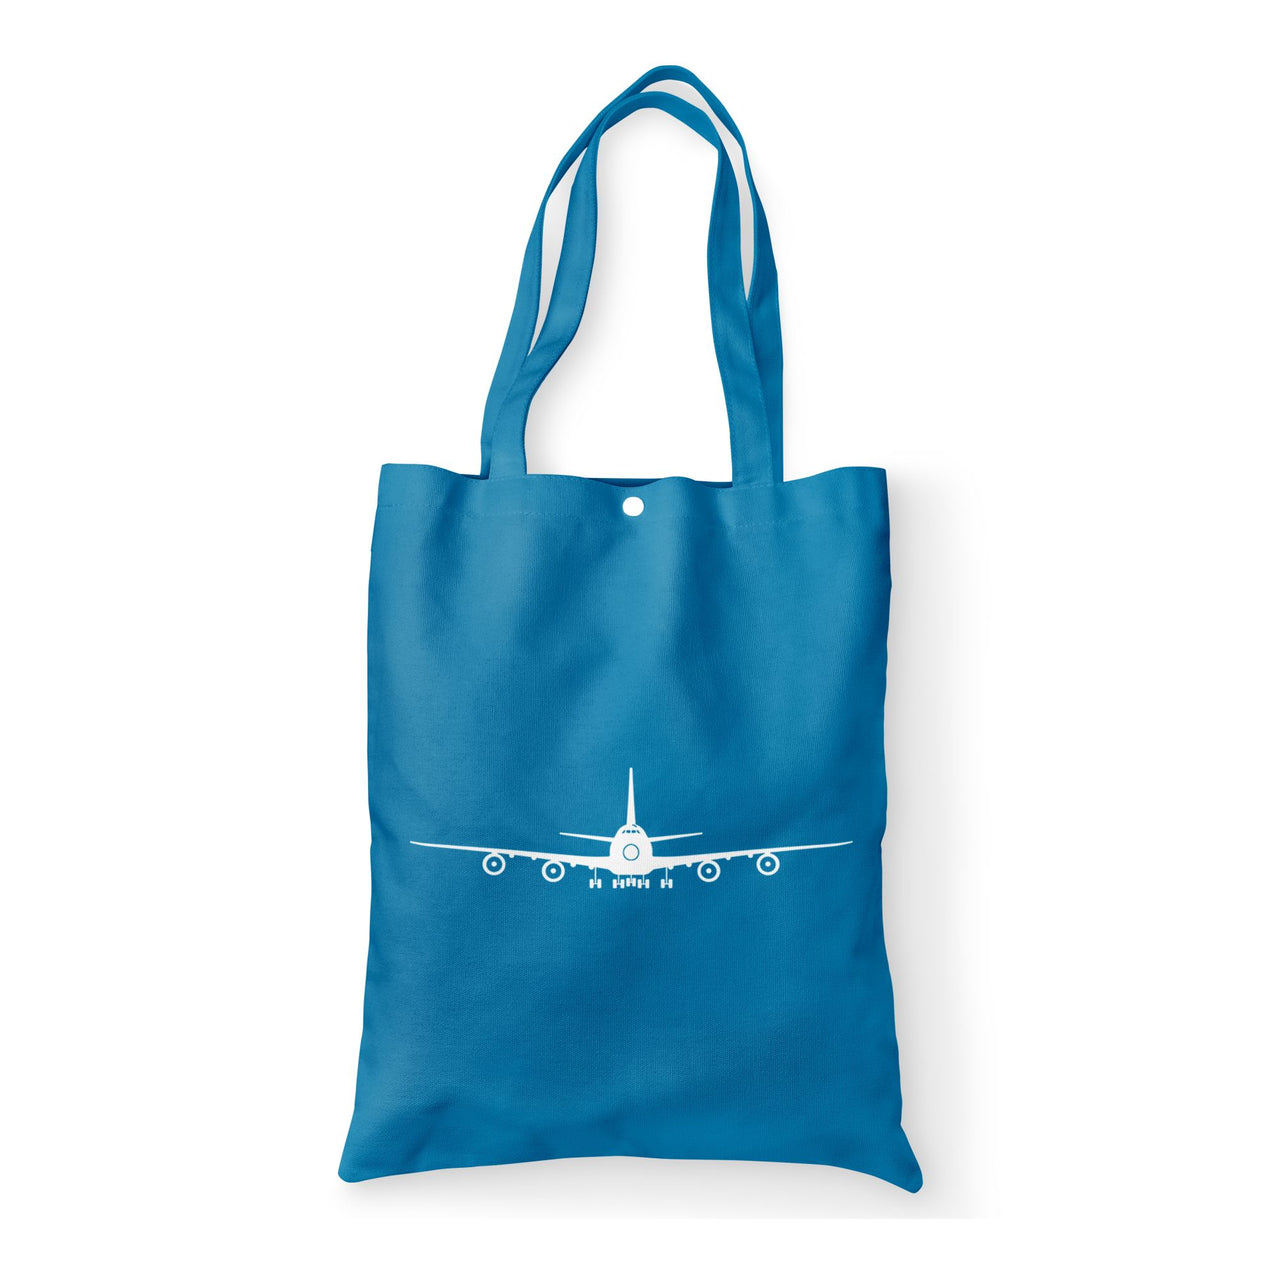 Boeing 747 Silhouette Designed Tote Bags